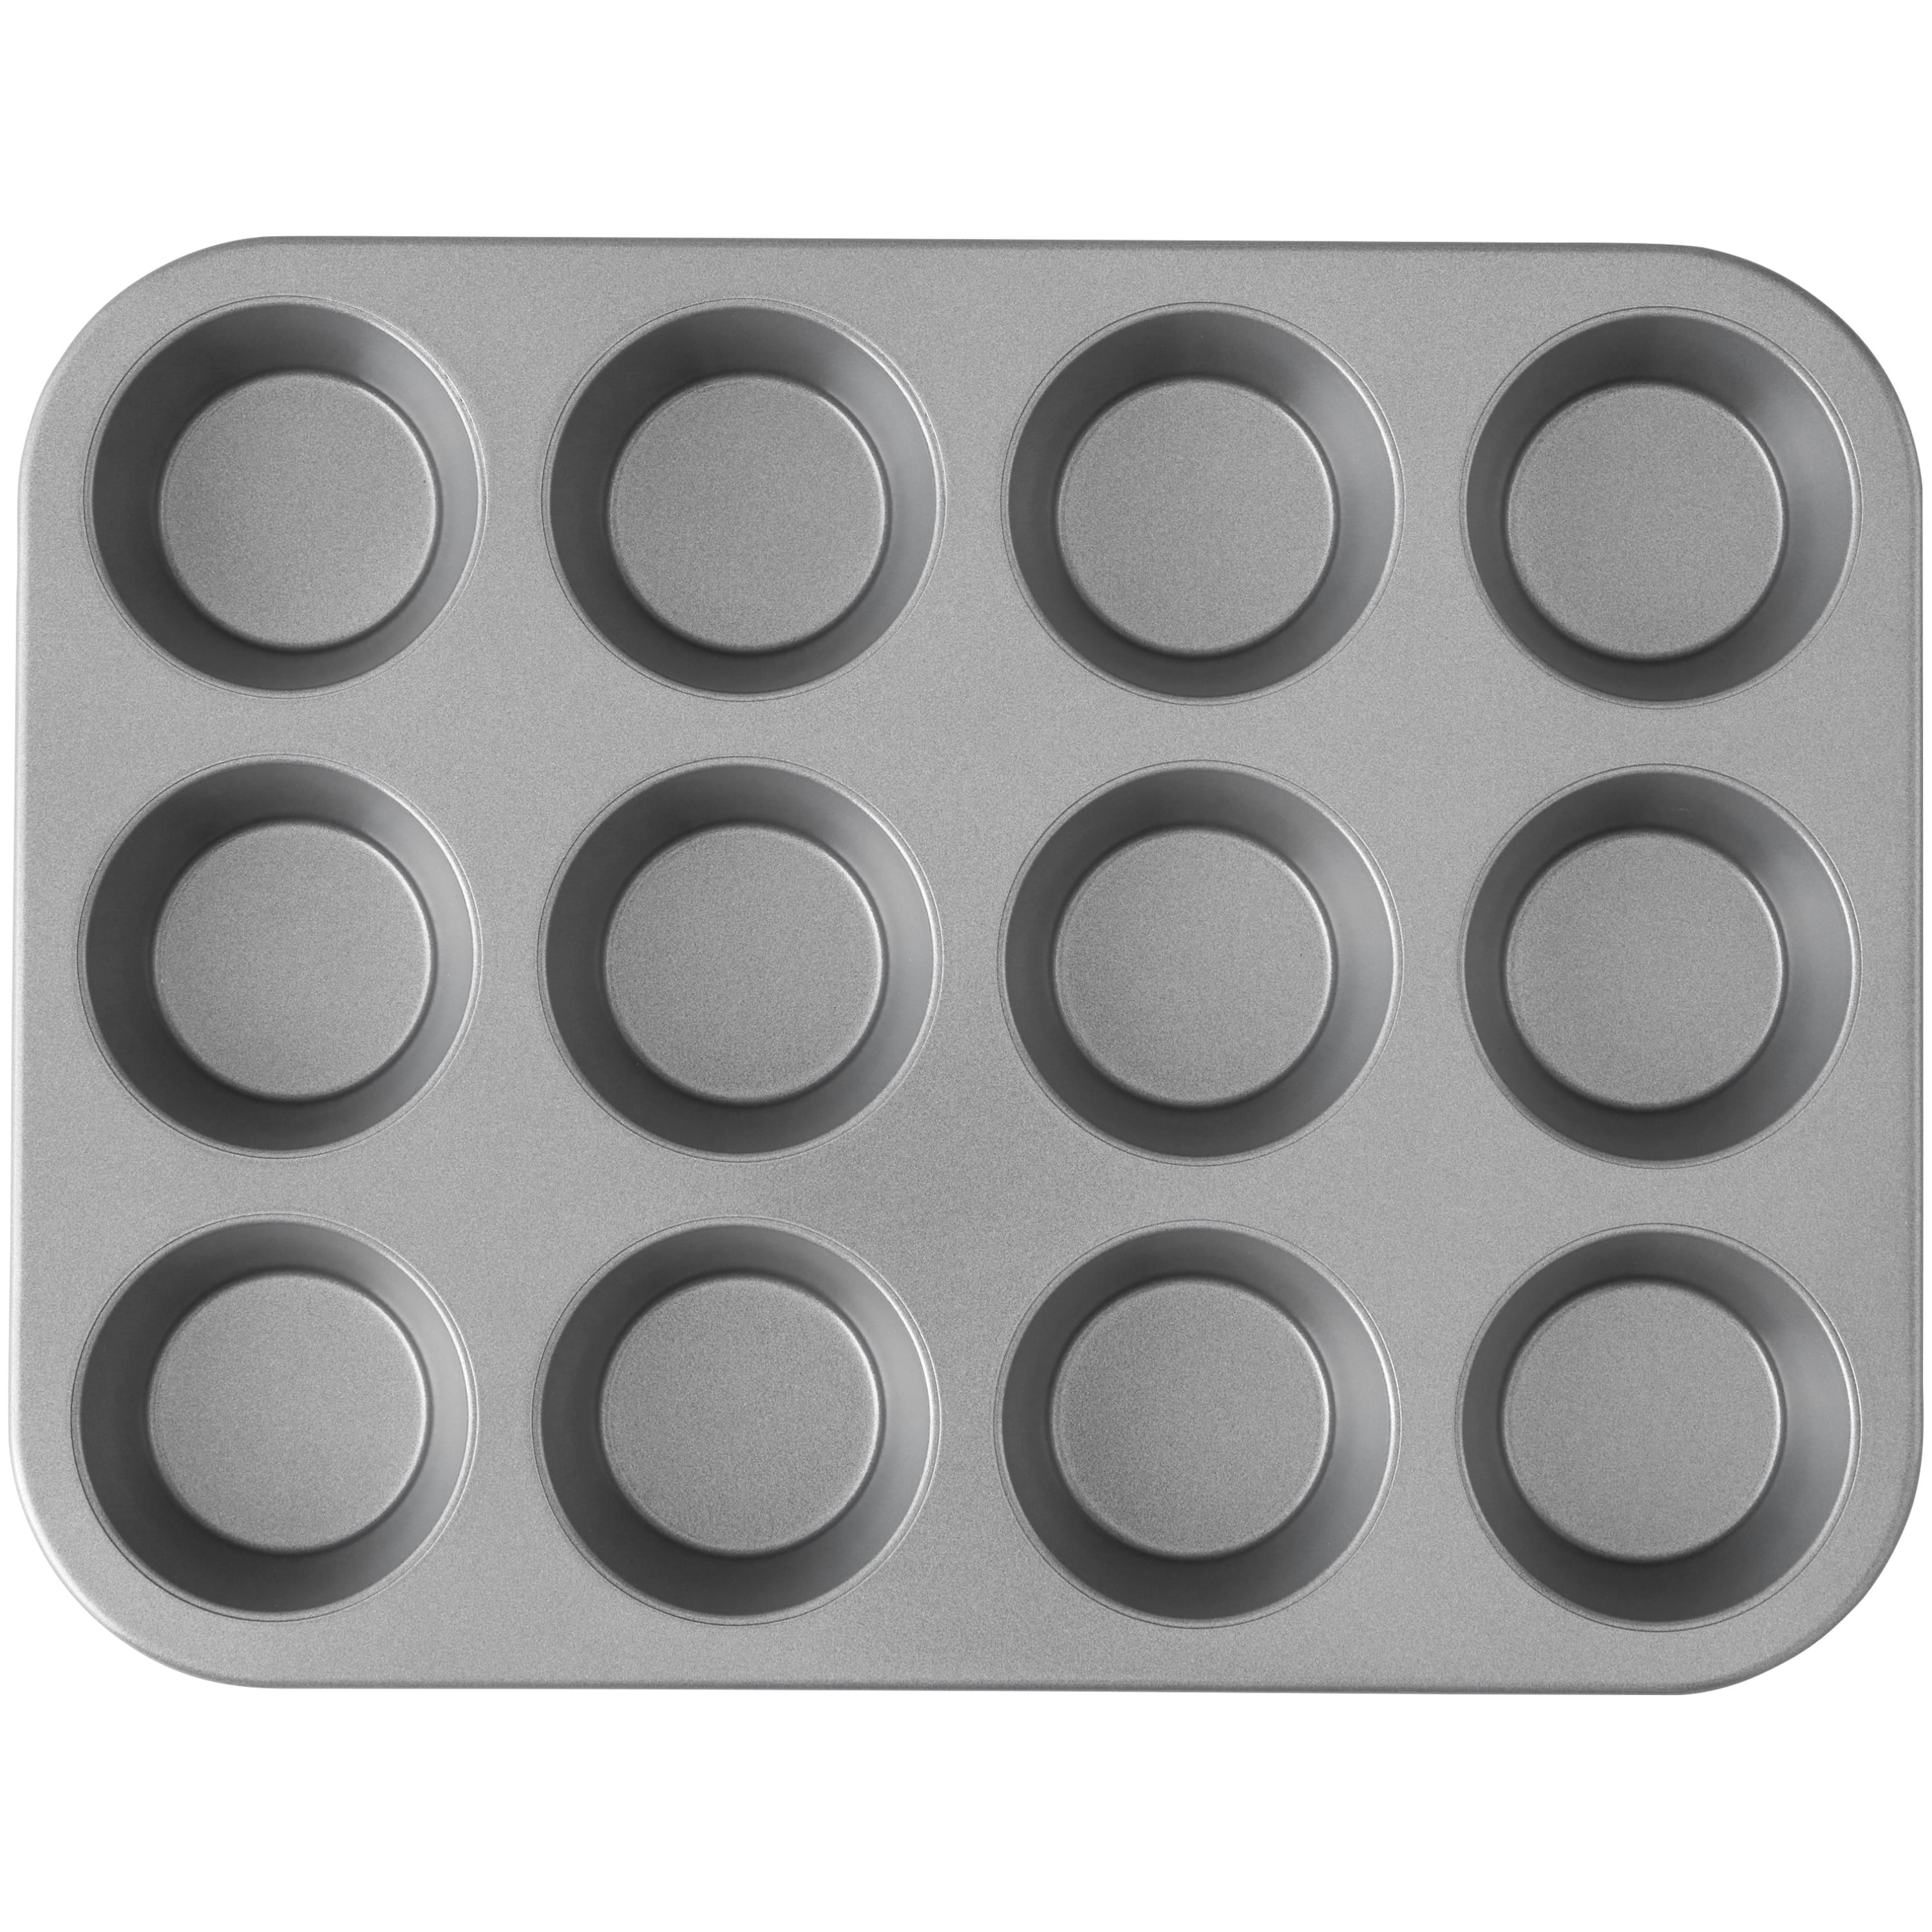 2-Pack Black Party Essentials Soft Plastic 16-Inch Round 19-Cavity Cupcake Trays 